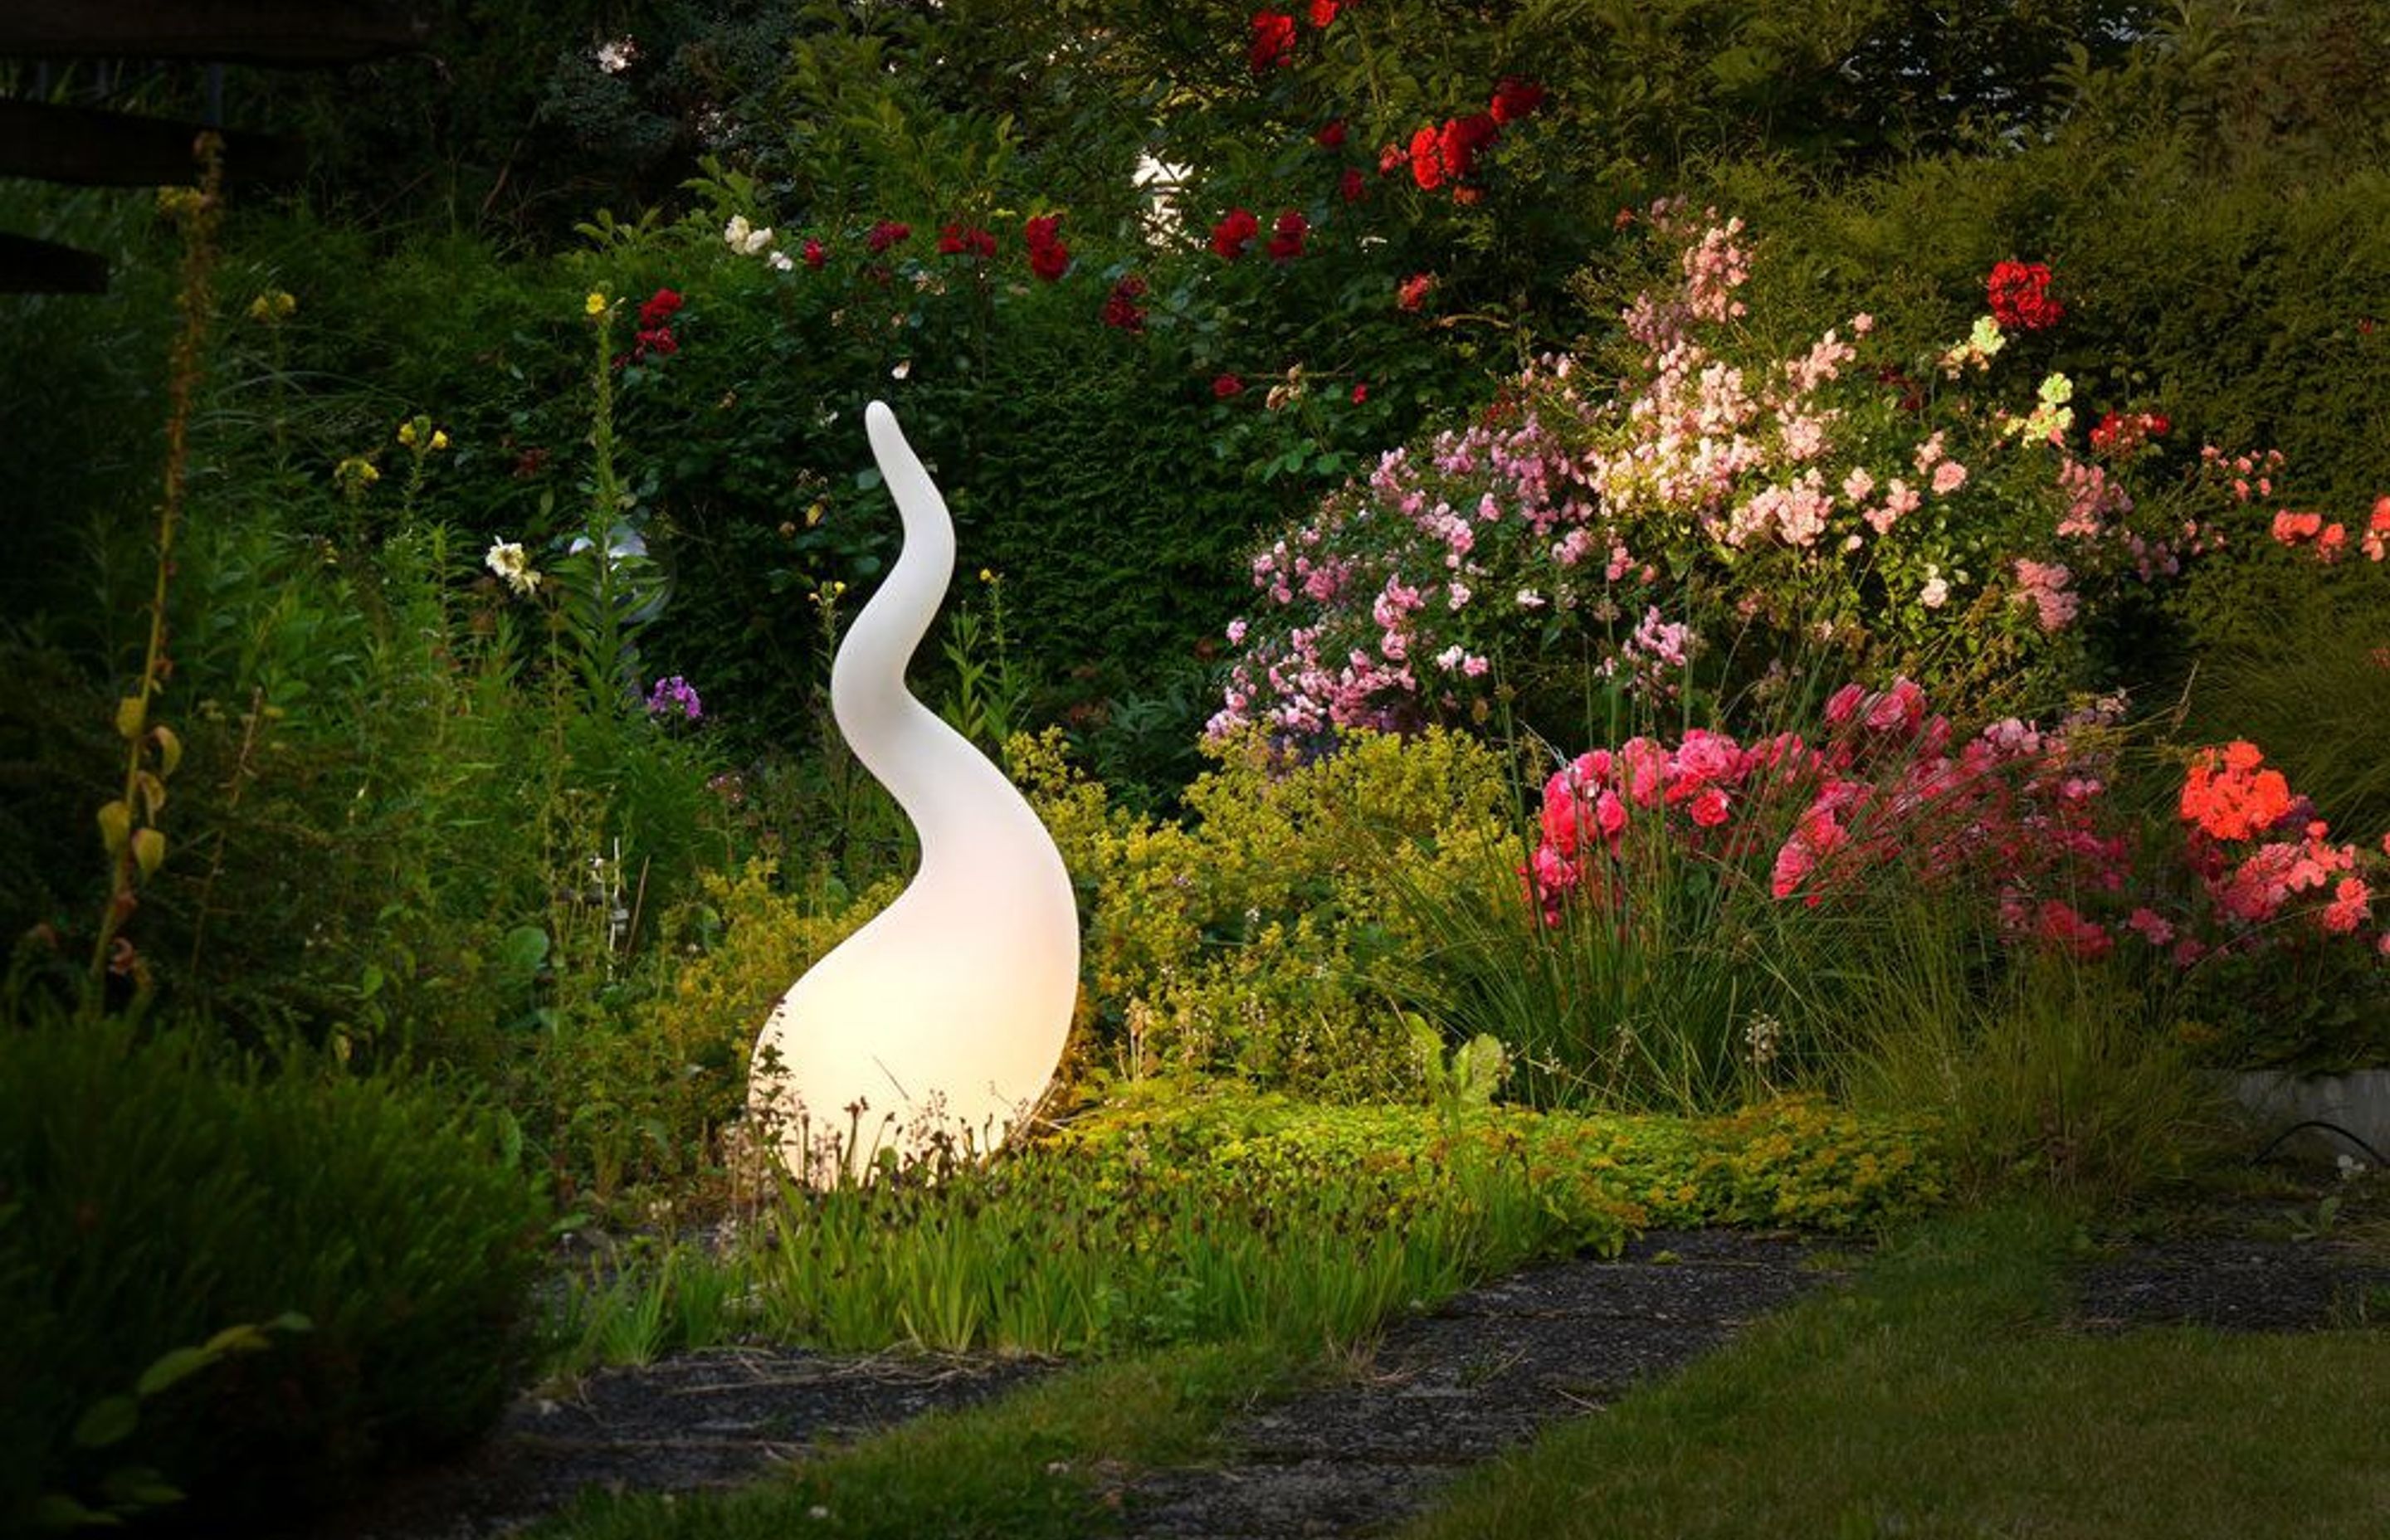 The Alien Outdoor Lamp by Next from Garden Solutions excites with its unusual shape.